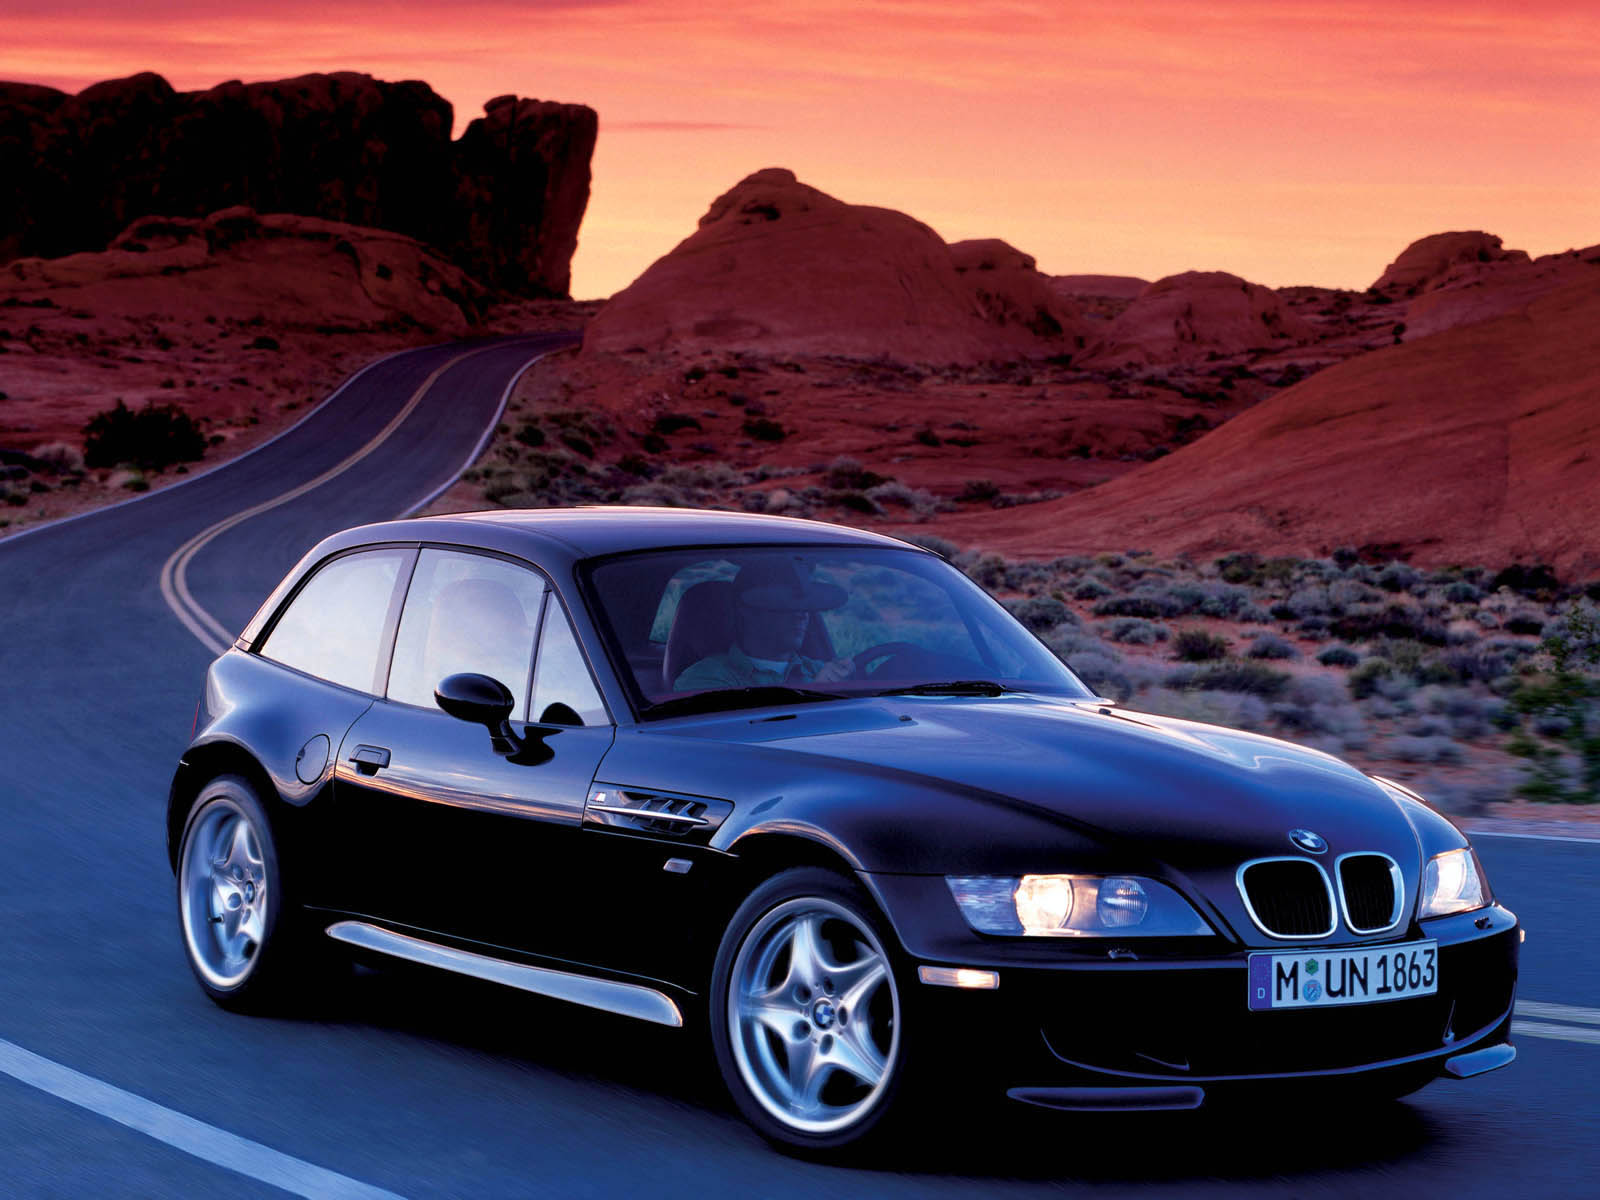 You can vote for this BMW Z3 M Coupe photo